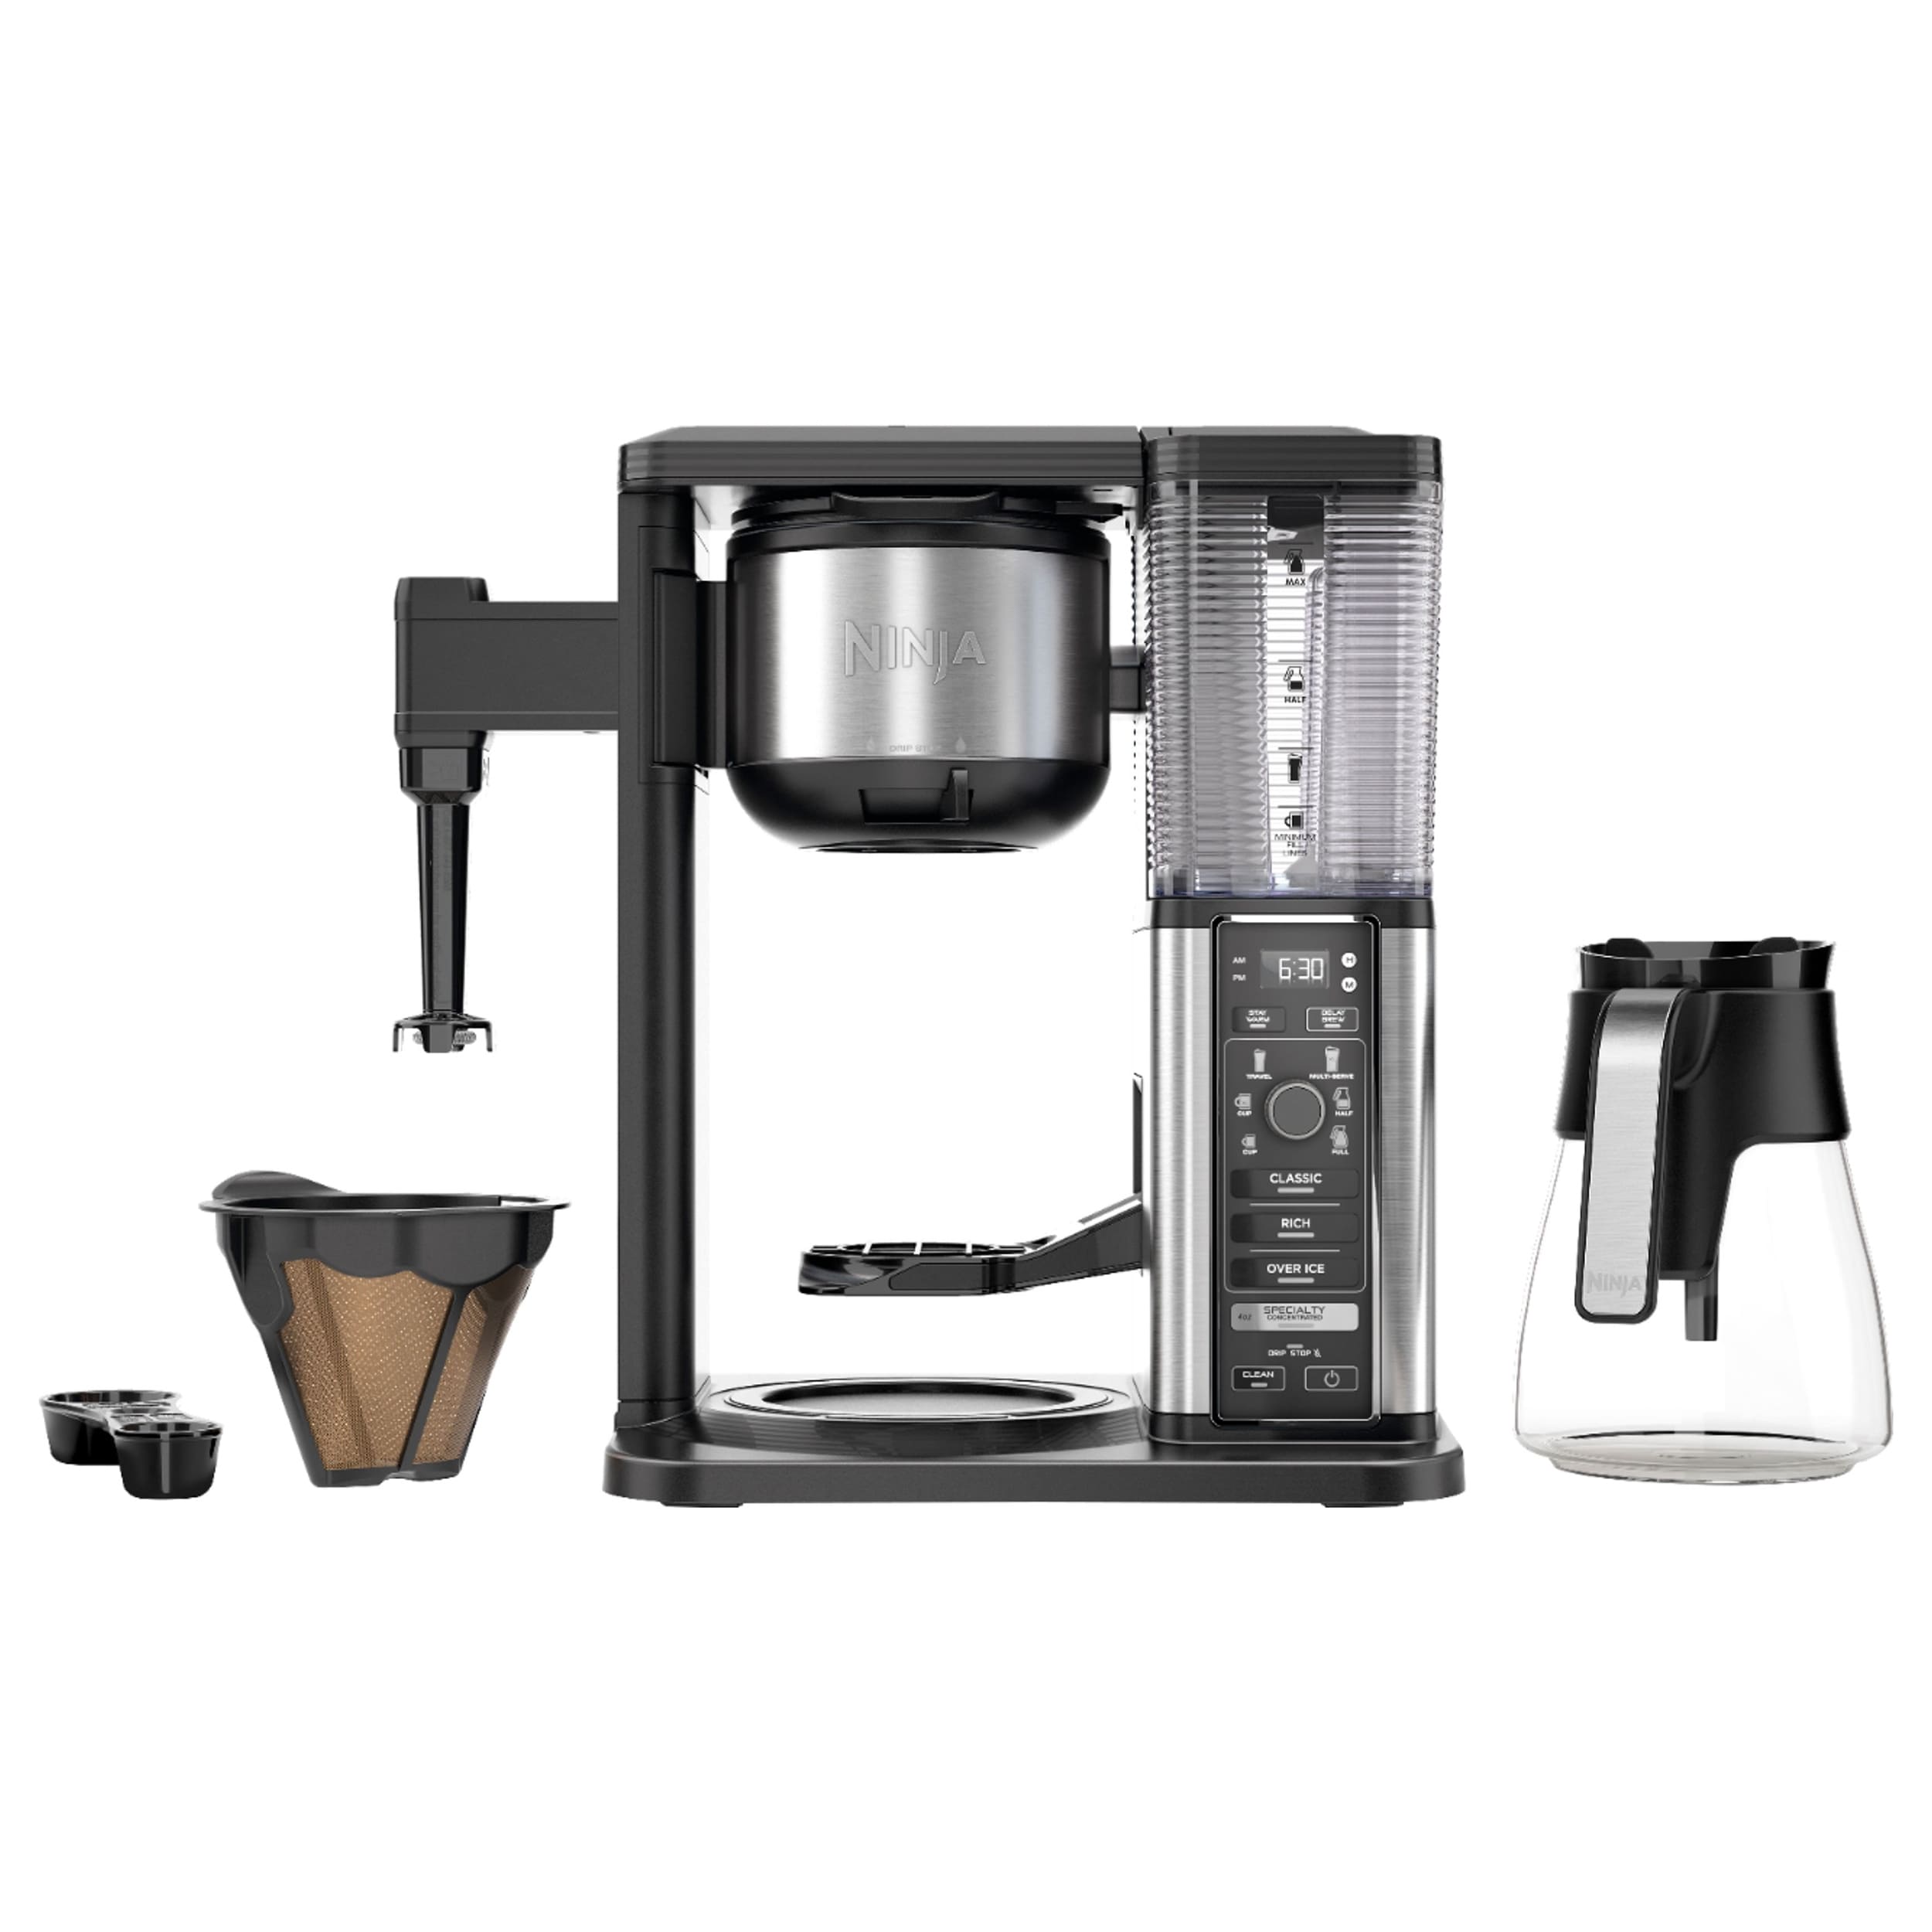 Ninja Specialty 10-Cup Coffee Maker, with 4 Brew Styles for Ground